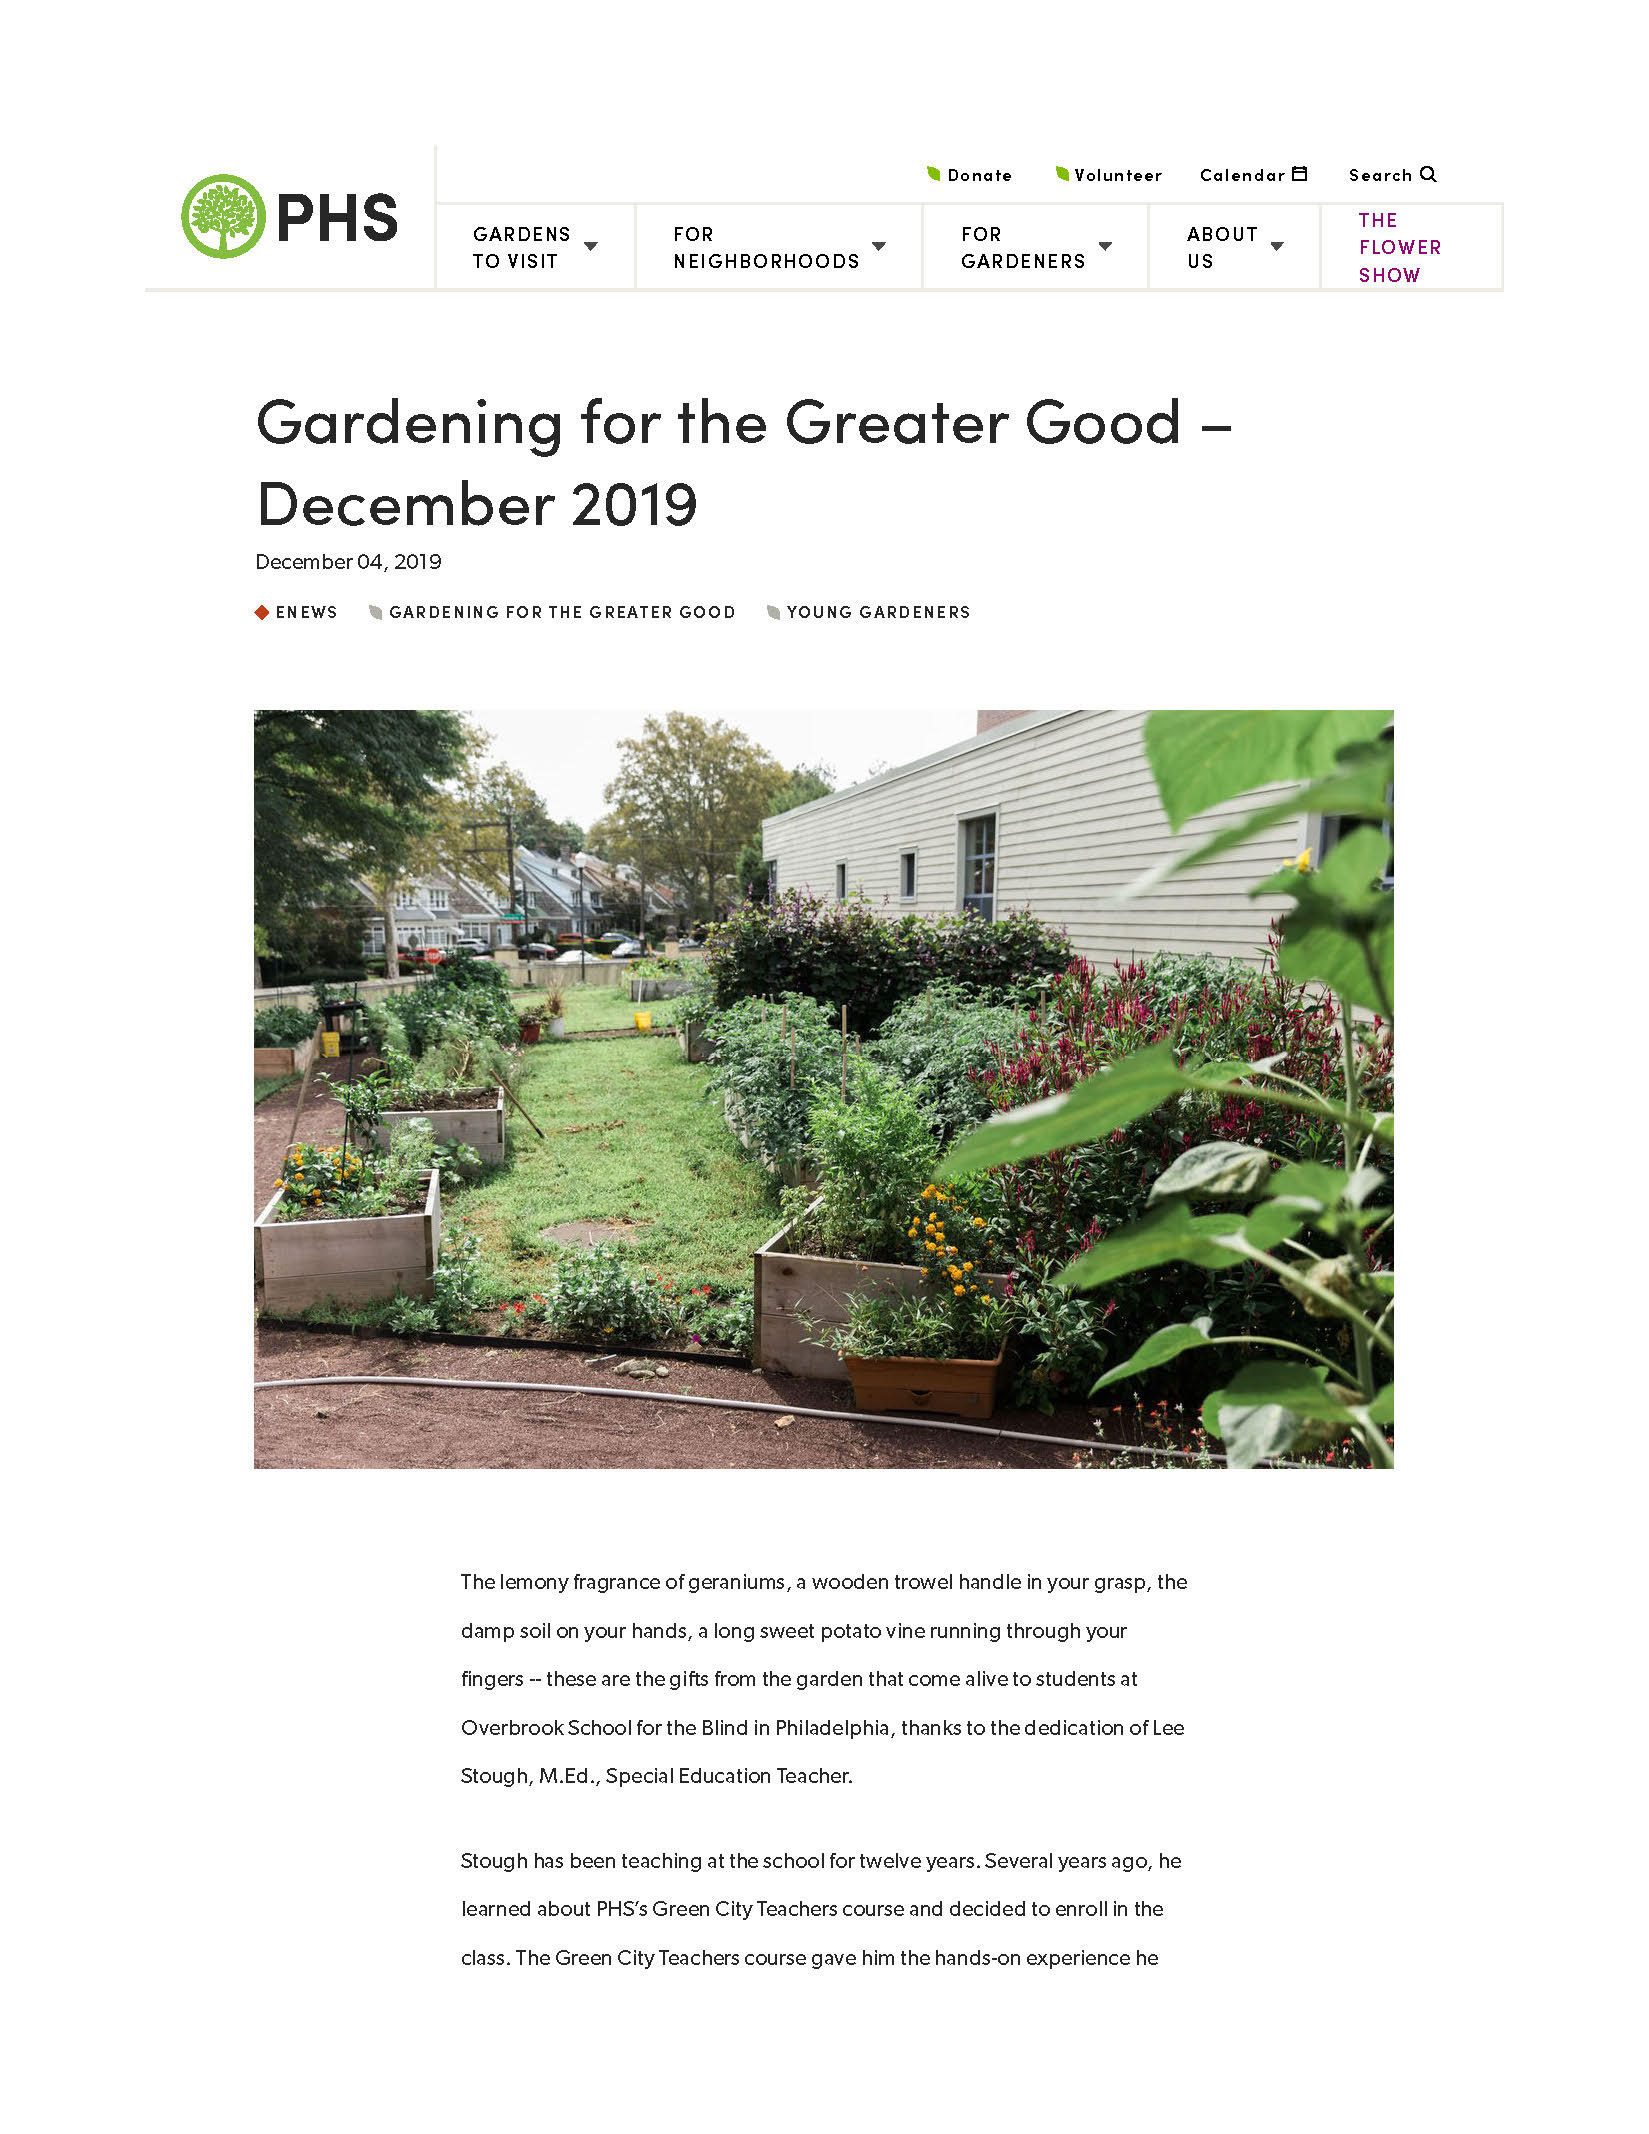 Gardening for the Greater Good - Overbrook School for the Blind